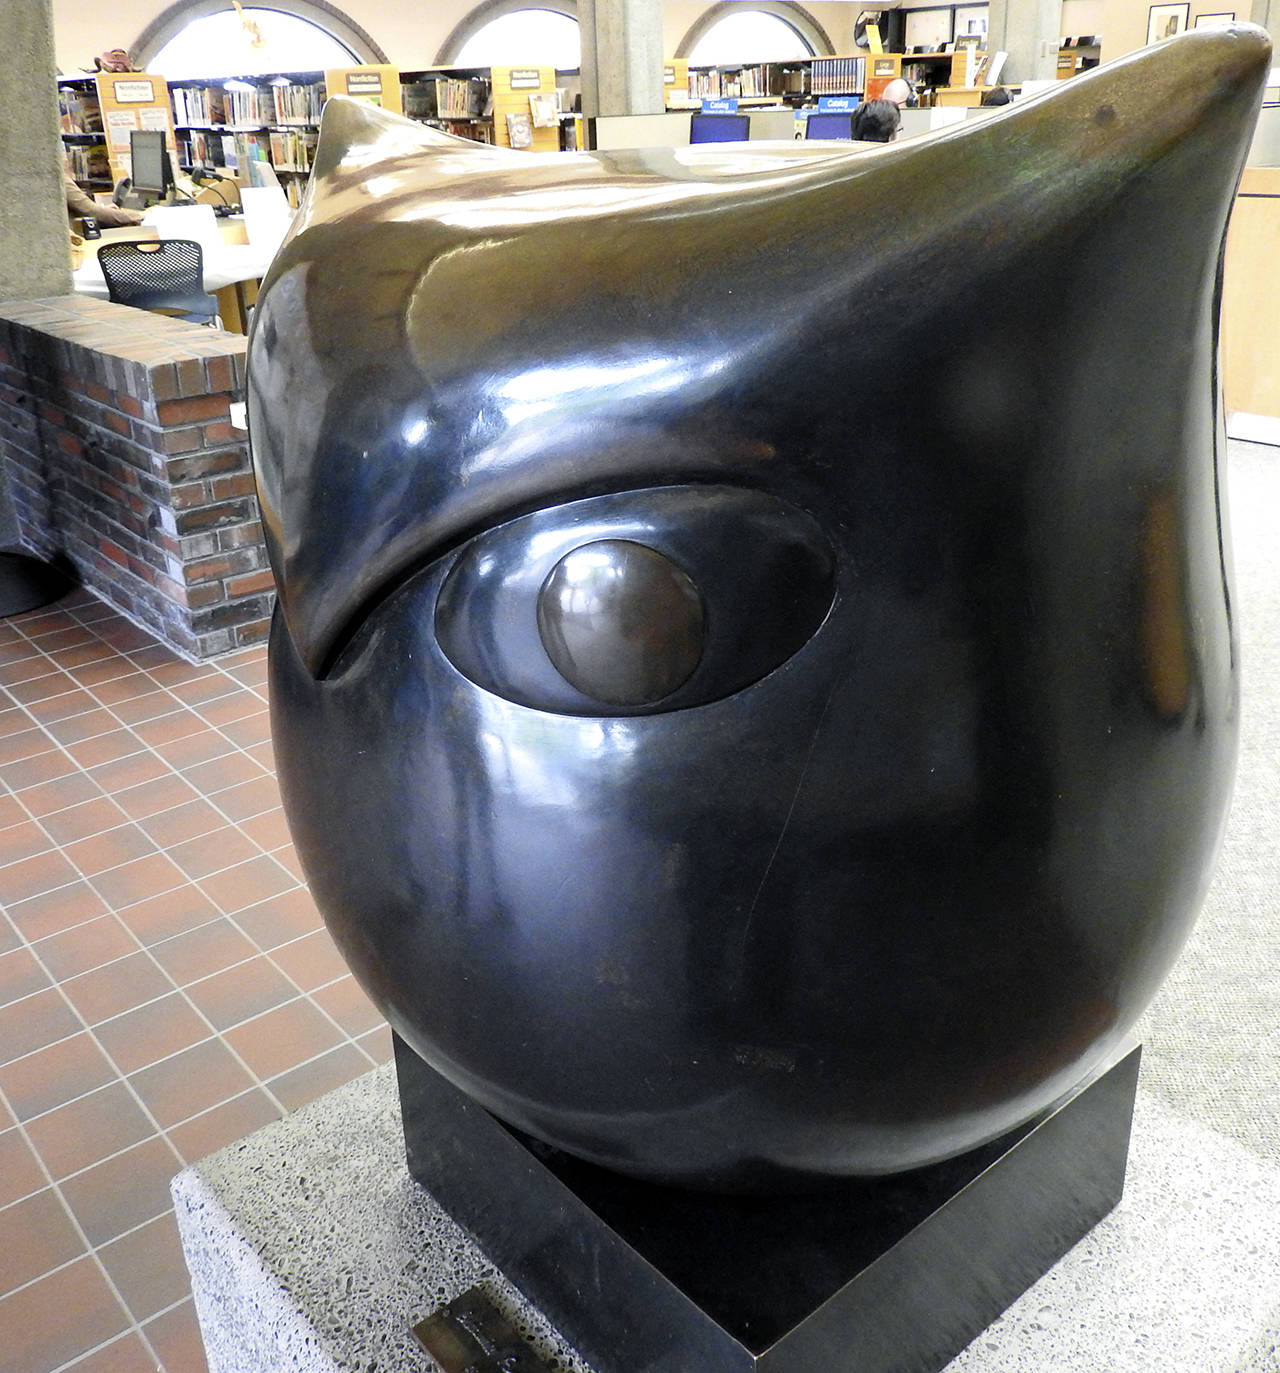 (Kat Bryant | The Daily World) The Owl, a 300-pound bronze sculpture created by San Francisco artist Beniamino Bufano, has become an integral part of the library since its 1968 installation.